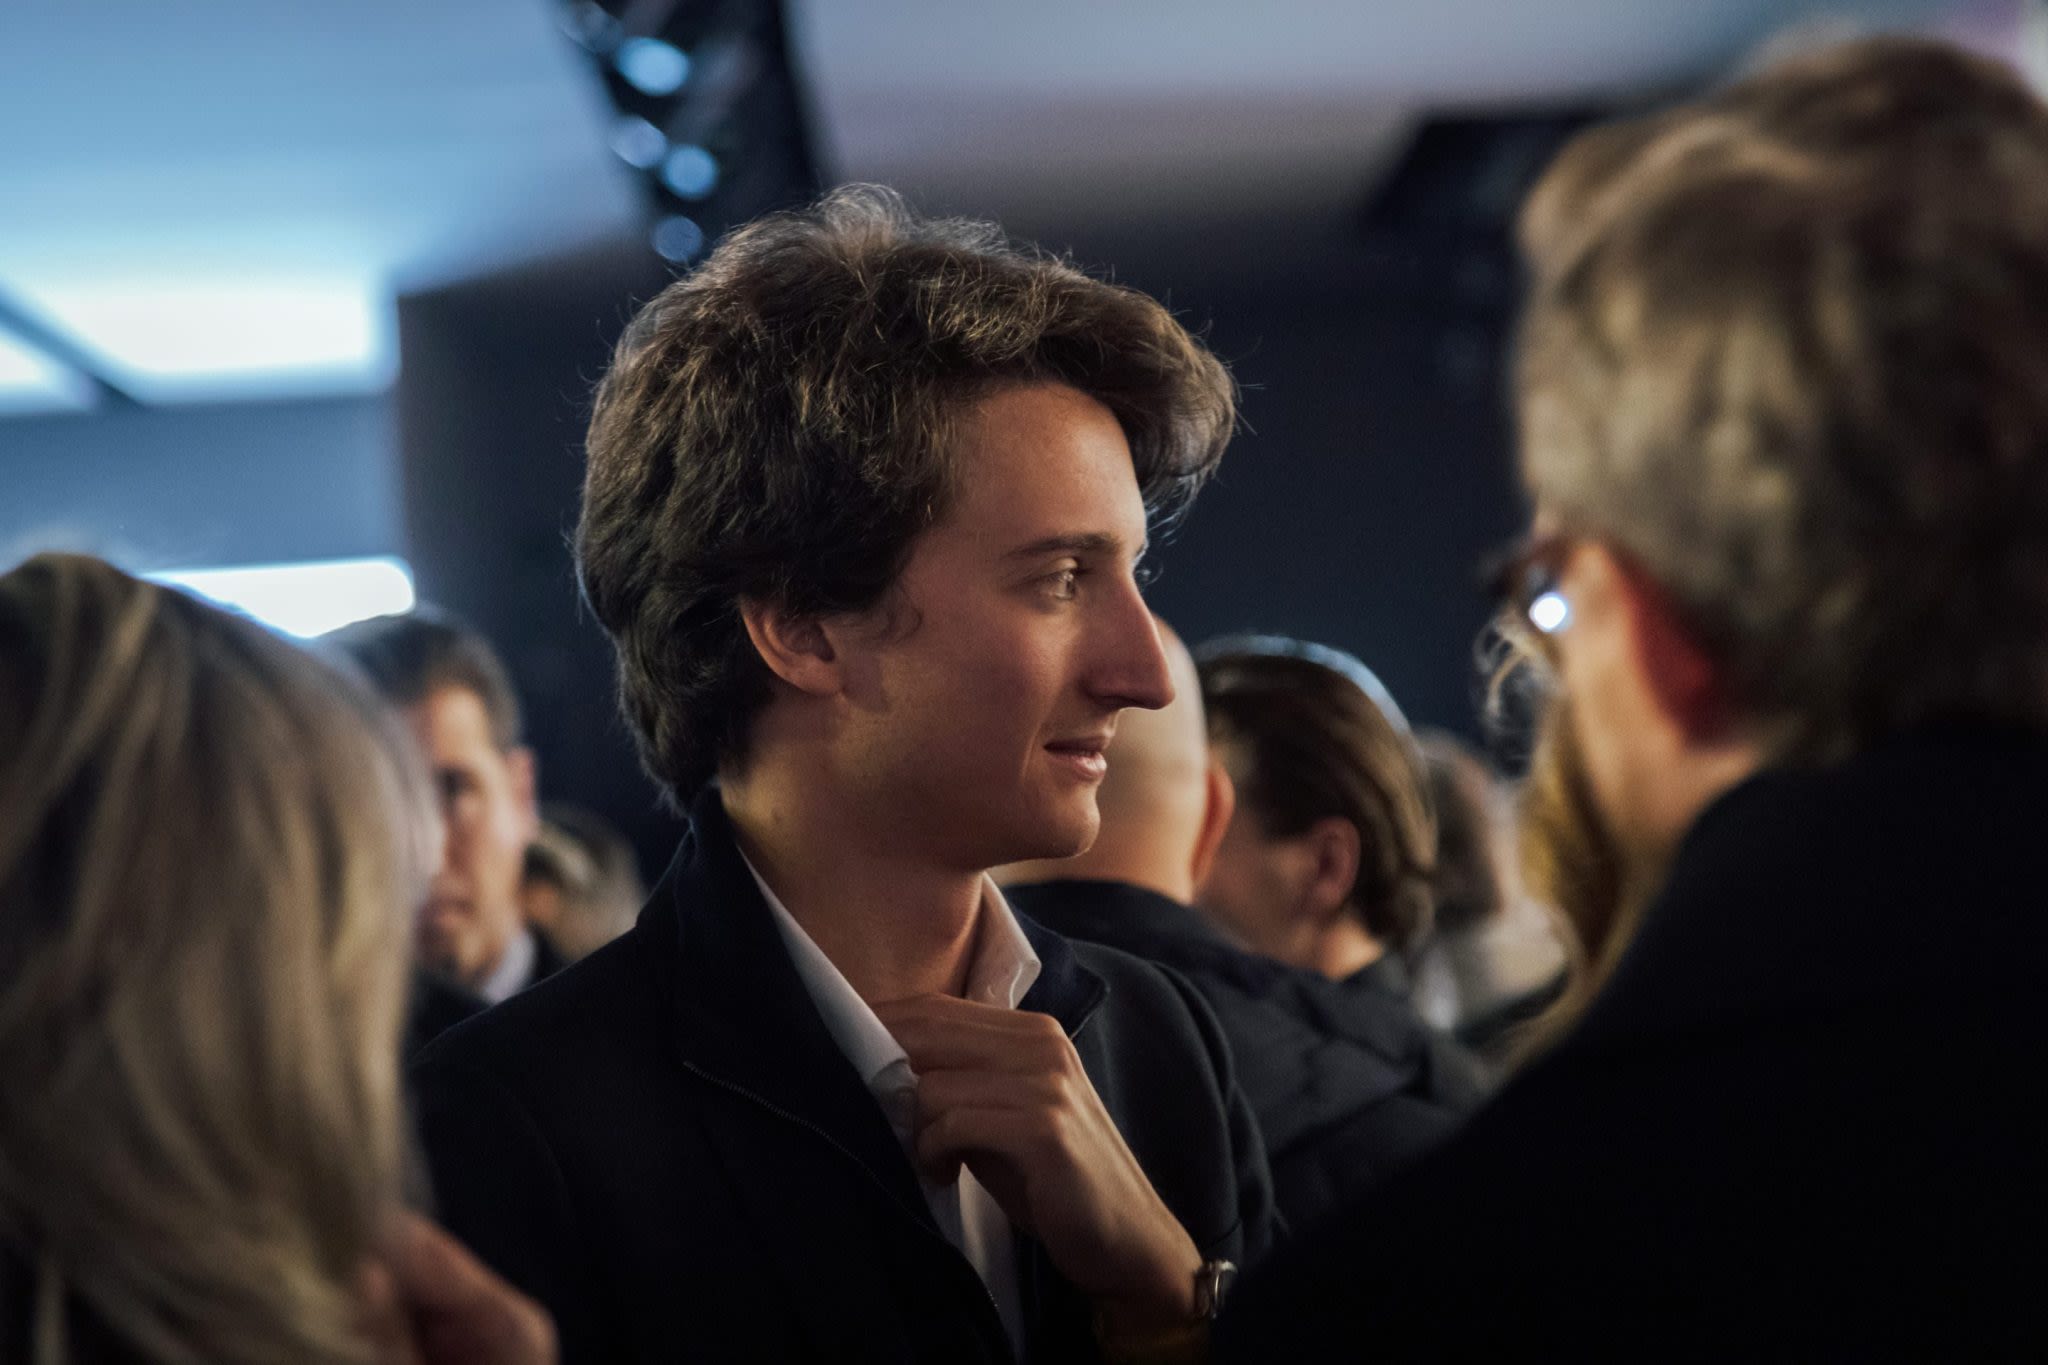 In a ‘Succession’-style move, even more of LVMH CEO Bernard Arnault’s kids are nabbing pivotal roles, while their Gen Z brother faces big test